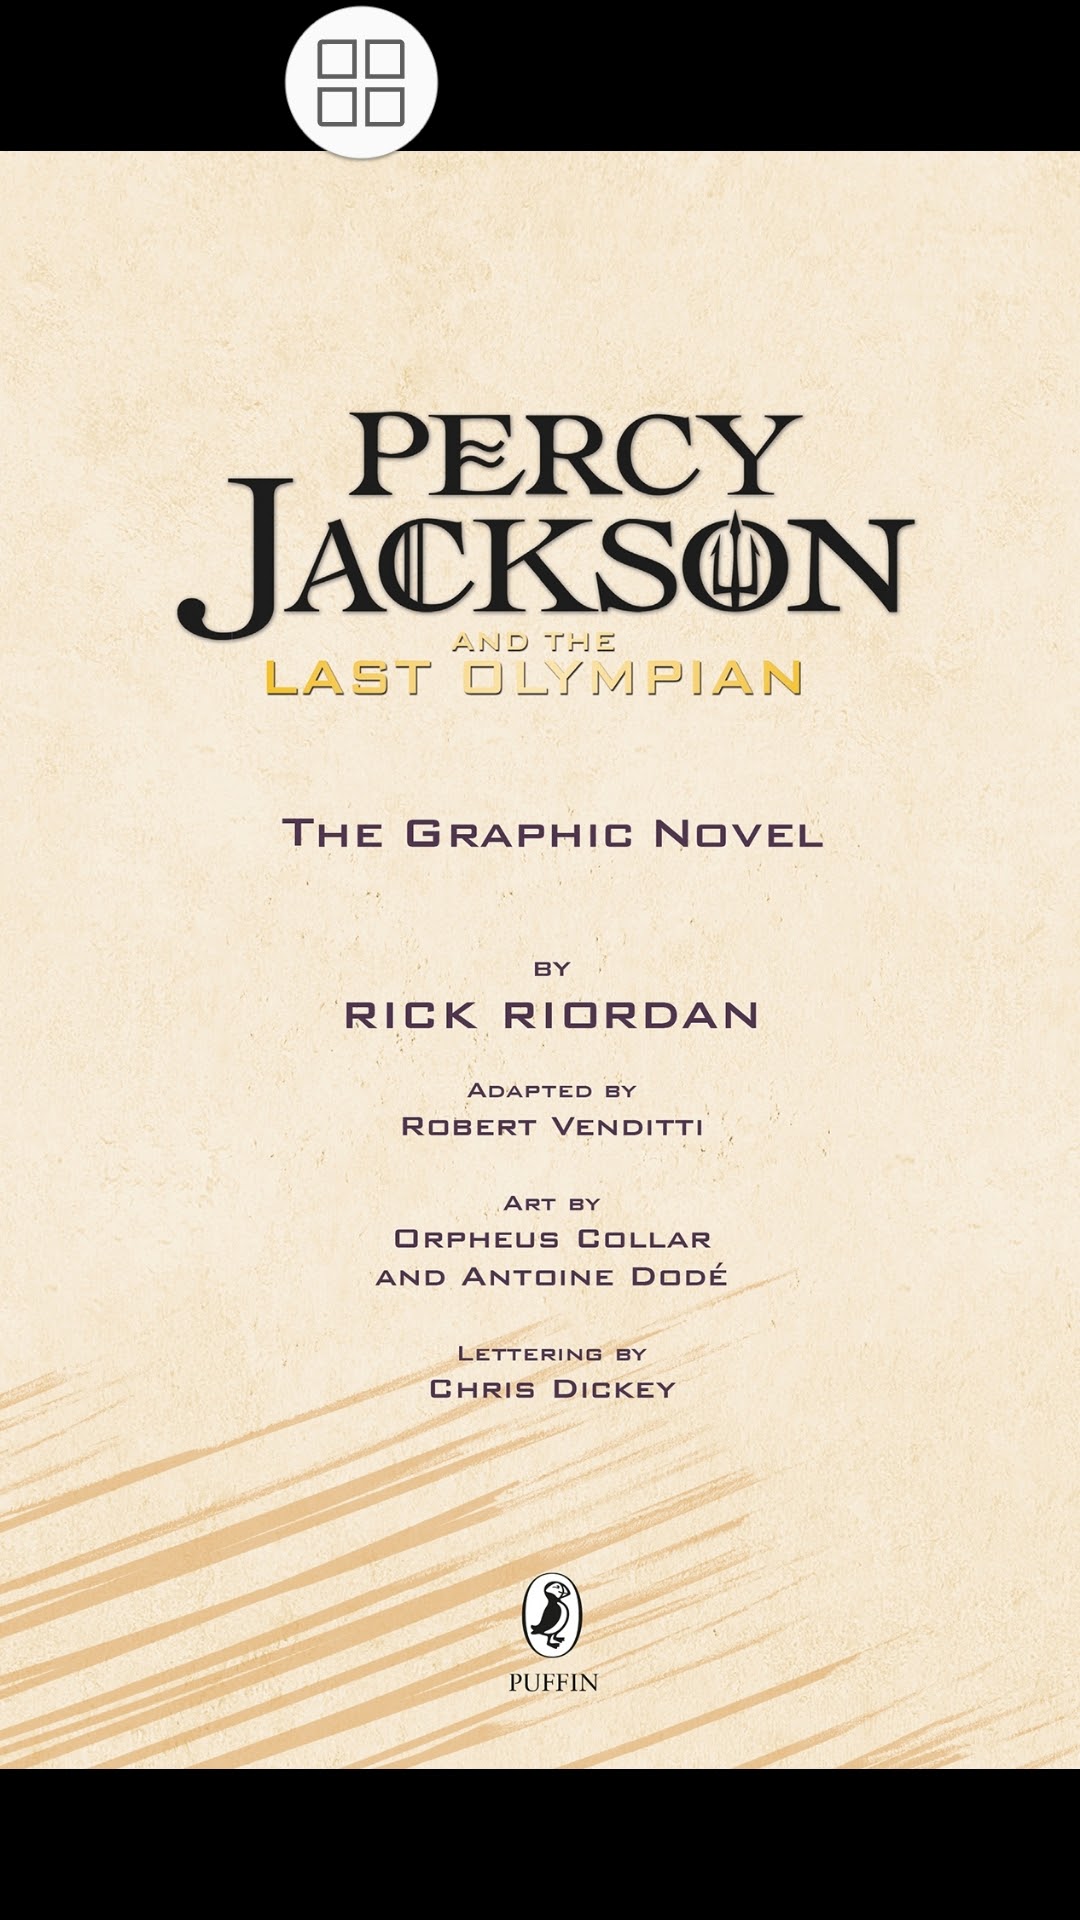 Read online Percy Jackson and the Olympians comic -  Issue # TPB 5 - 2